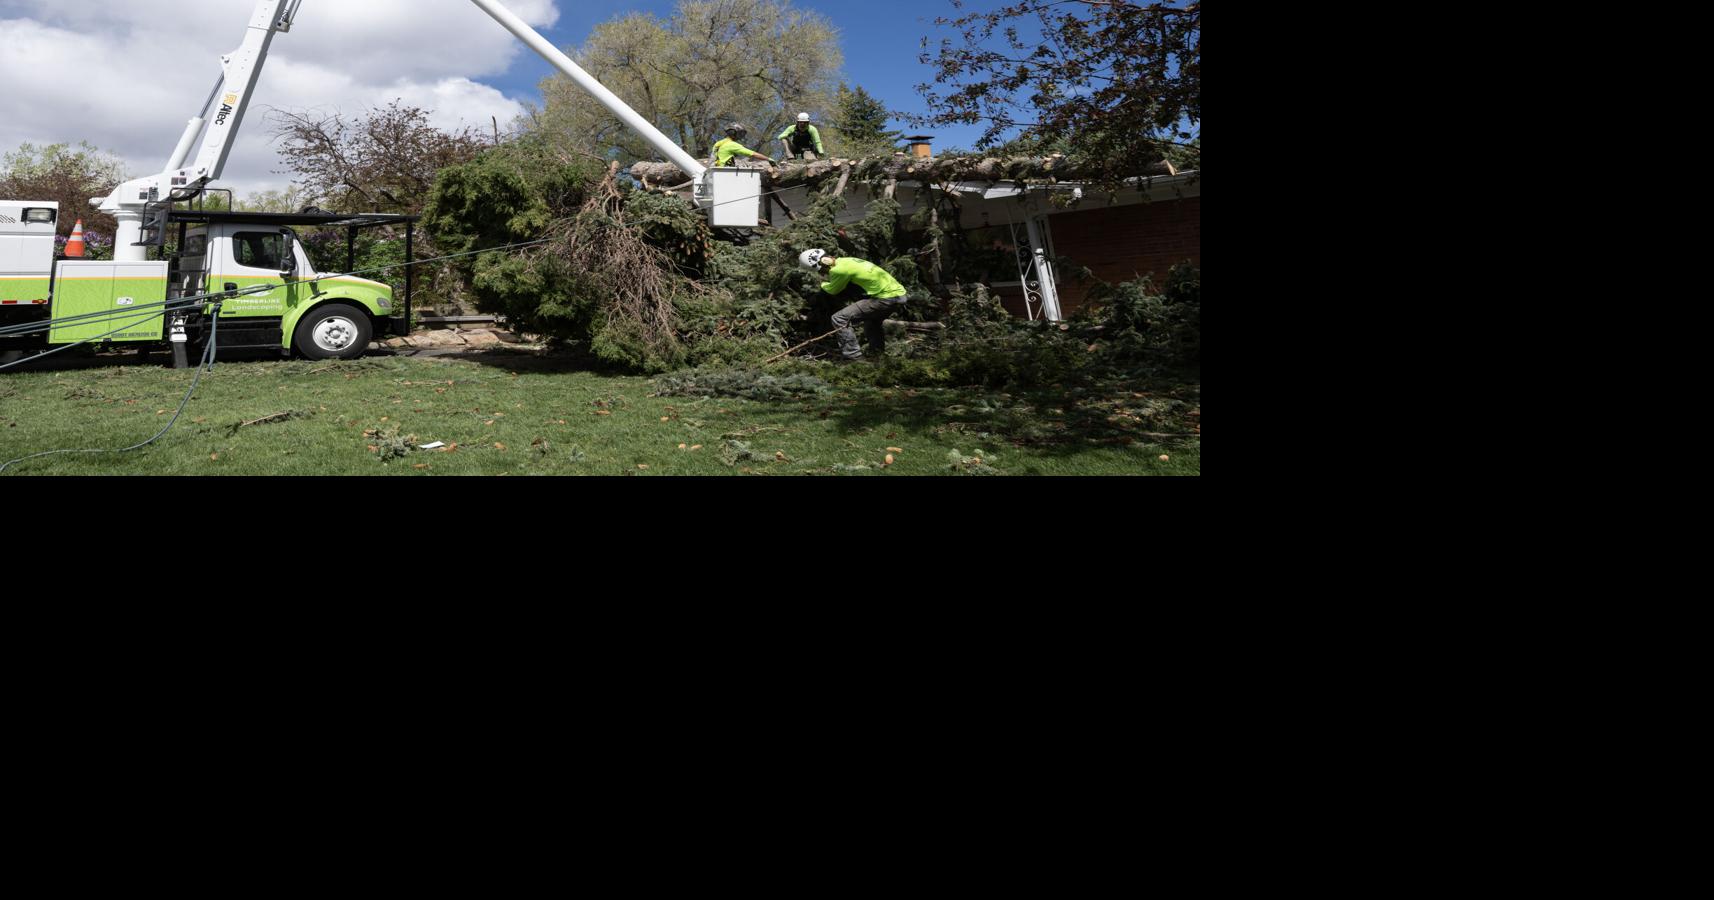 Colorado Springs wind storm downs power lines, closes schools and leaves thousands without power